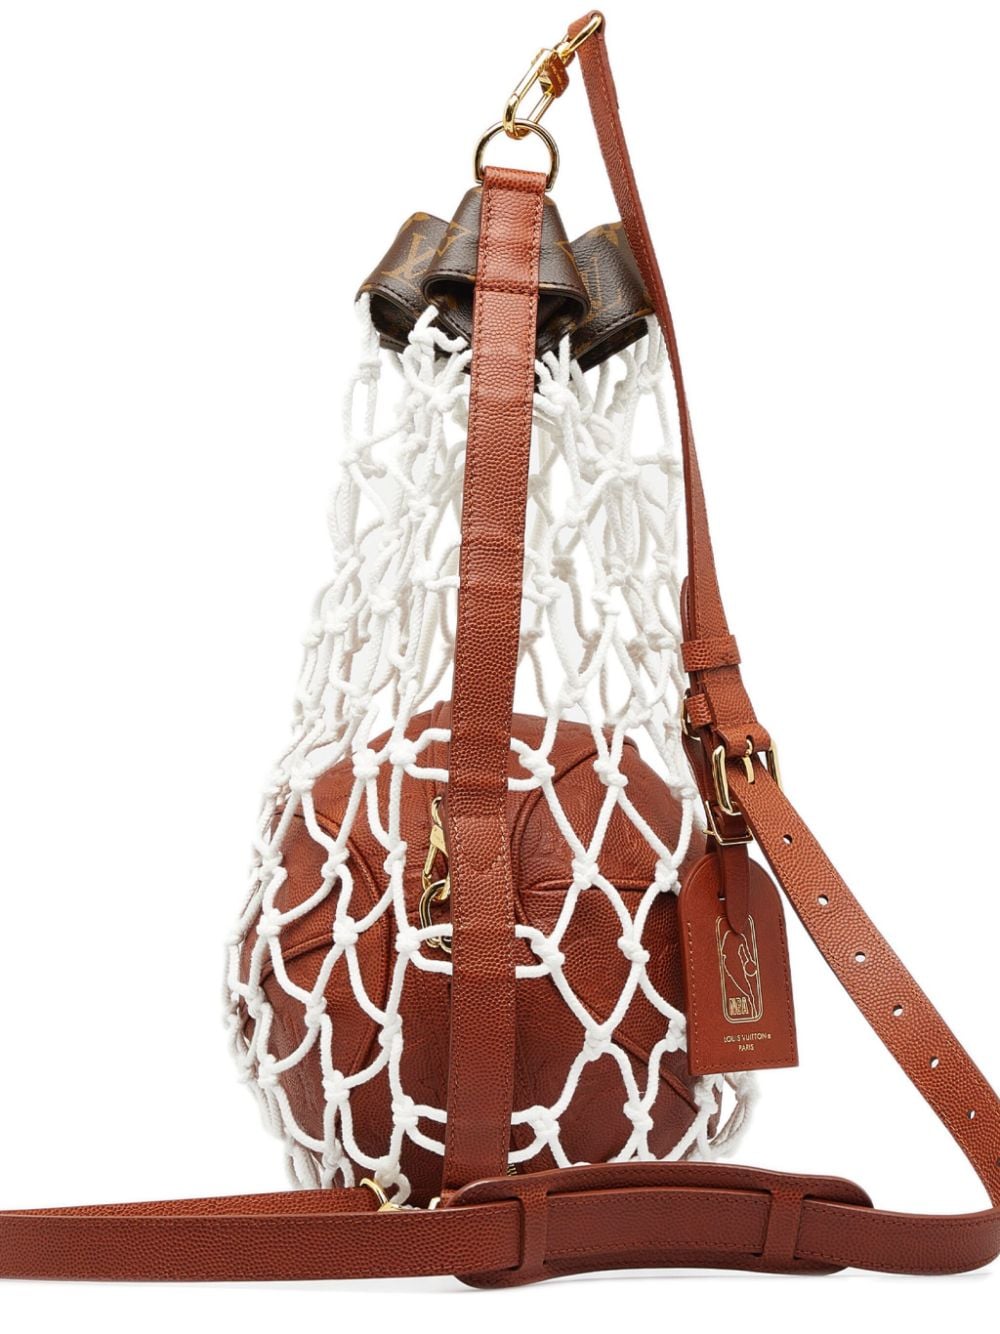 All About Detail! The NBA x Louis Vuitton Ball in Basket Bag